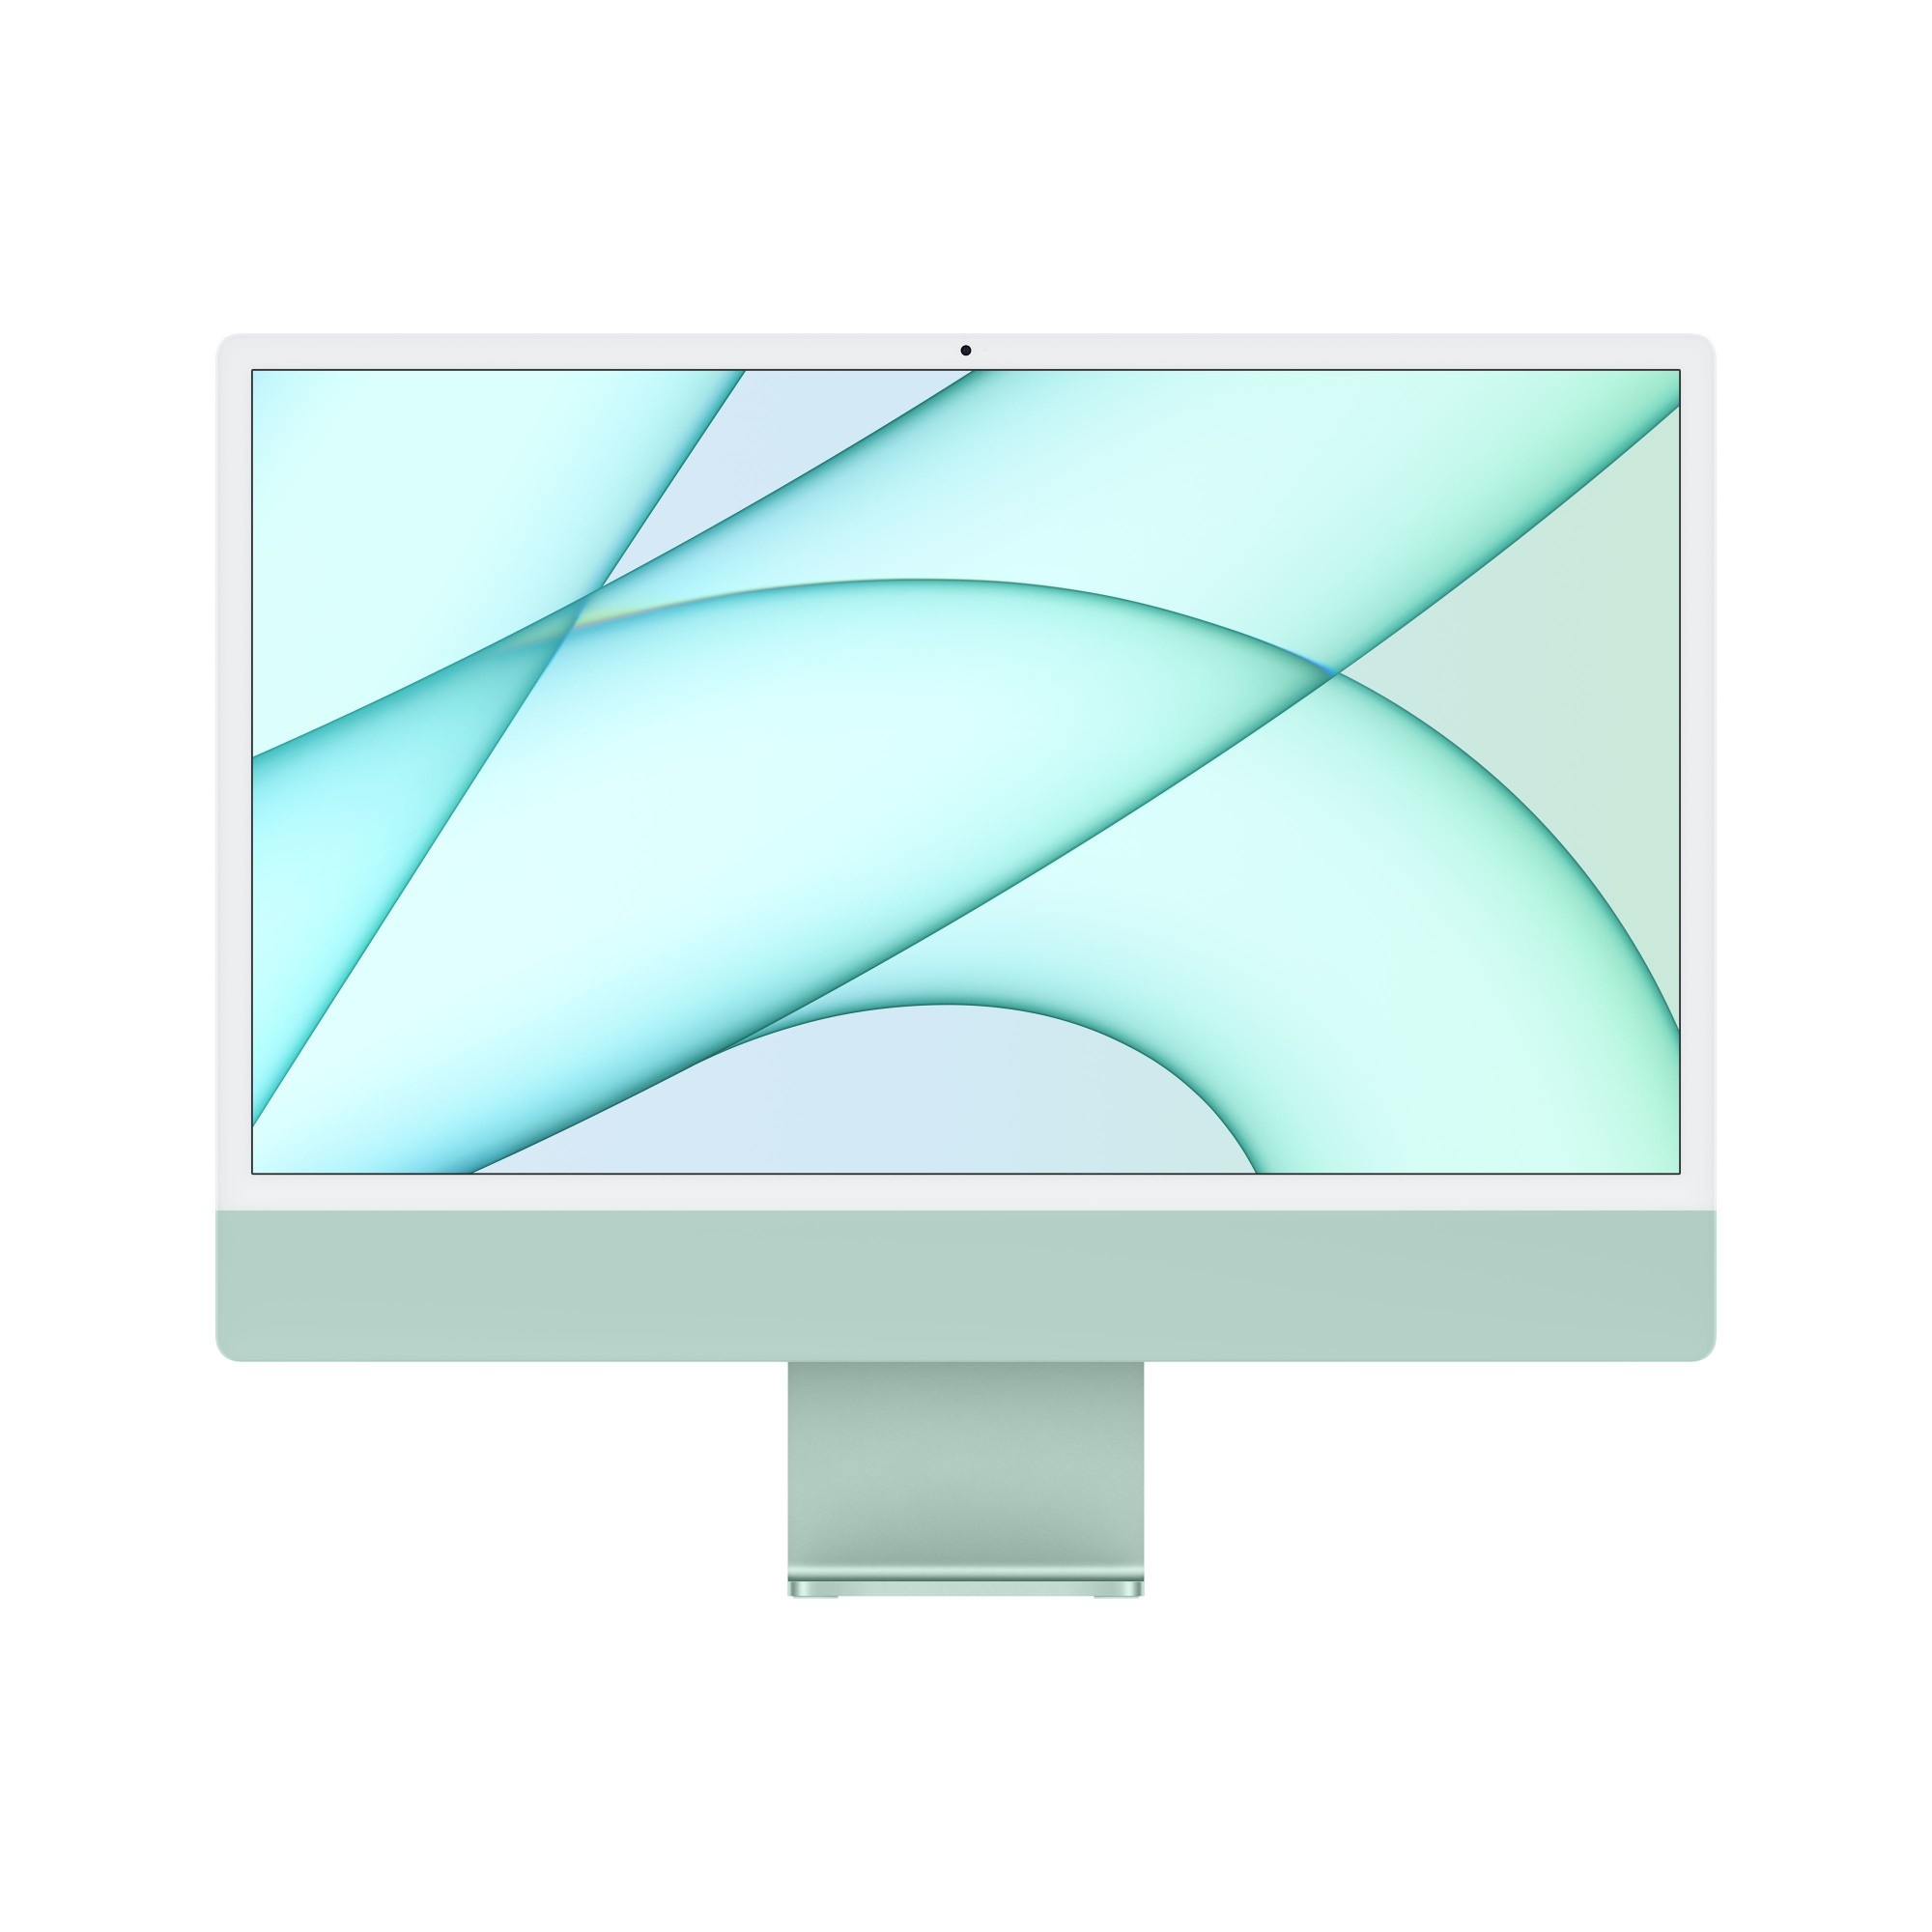 iMac, 24", Green, Apple M1 chip with 8-core CPU with 4 performance cores and 4 efficiency cores, 8-core GPU and 16-core Neural Engine, 8GB unified memory, 256GB SSD storage, Magic Mouse, Magic Keyboard with Touch ID - British, UK Power Supply